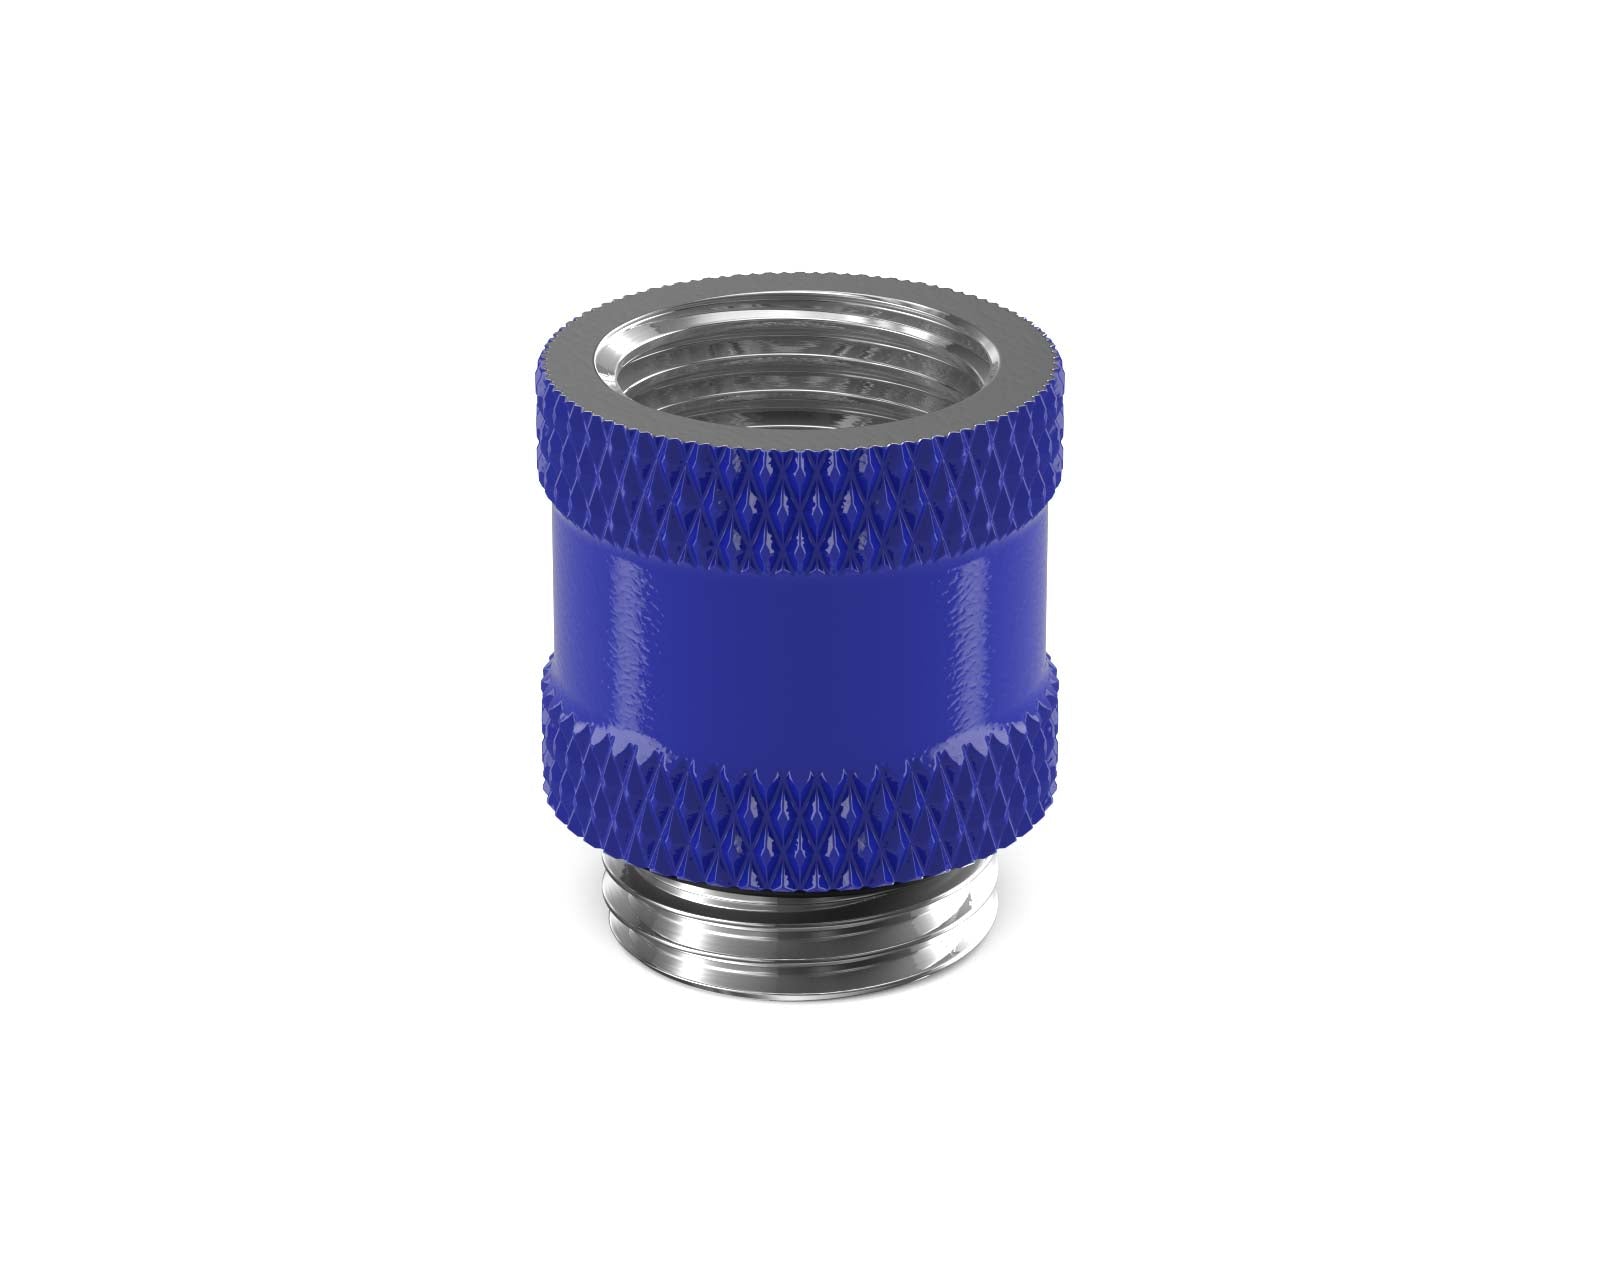 PrimoChill Male to Female G 1/4in. 15mm SX Extension Coupler - True Blue